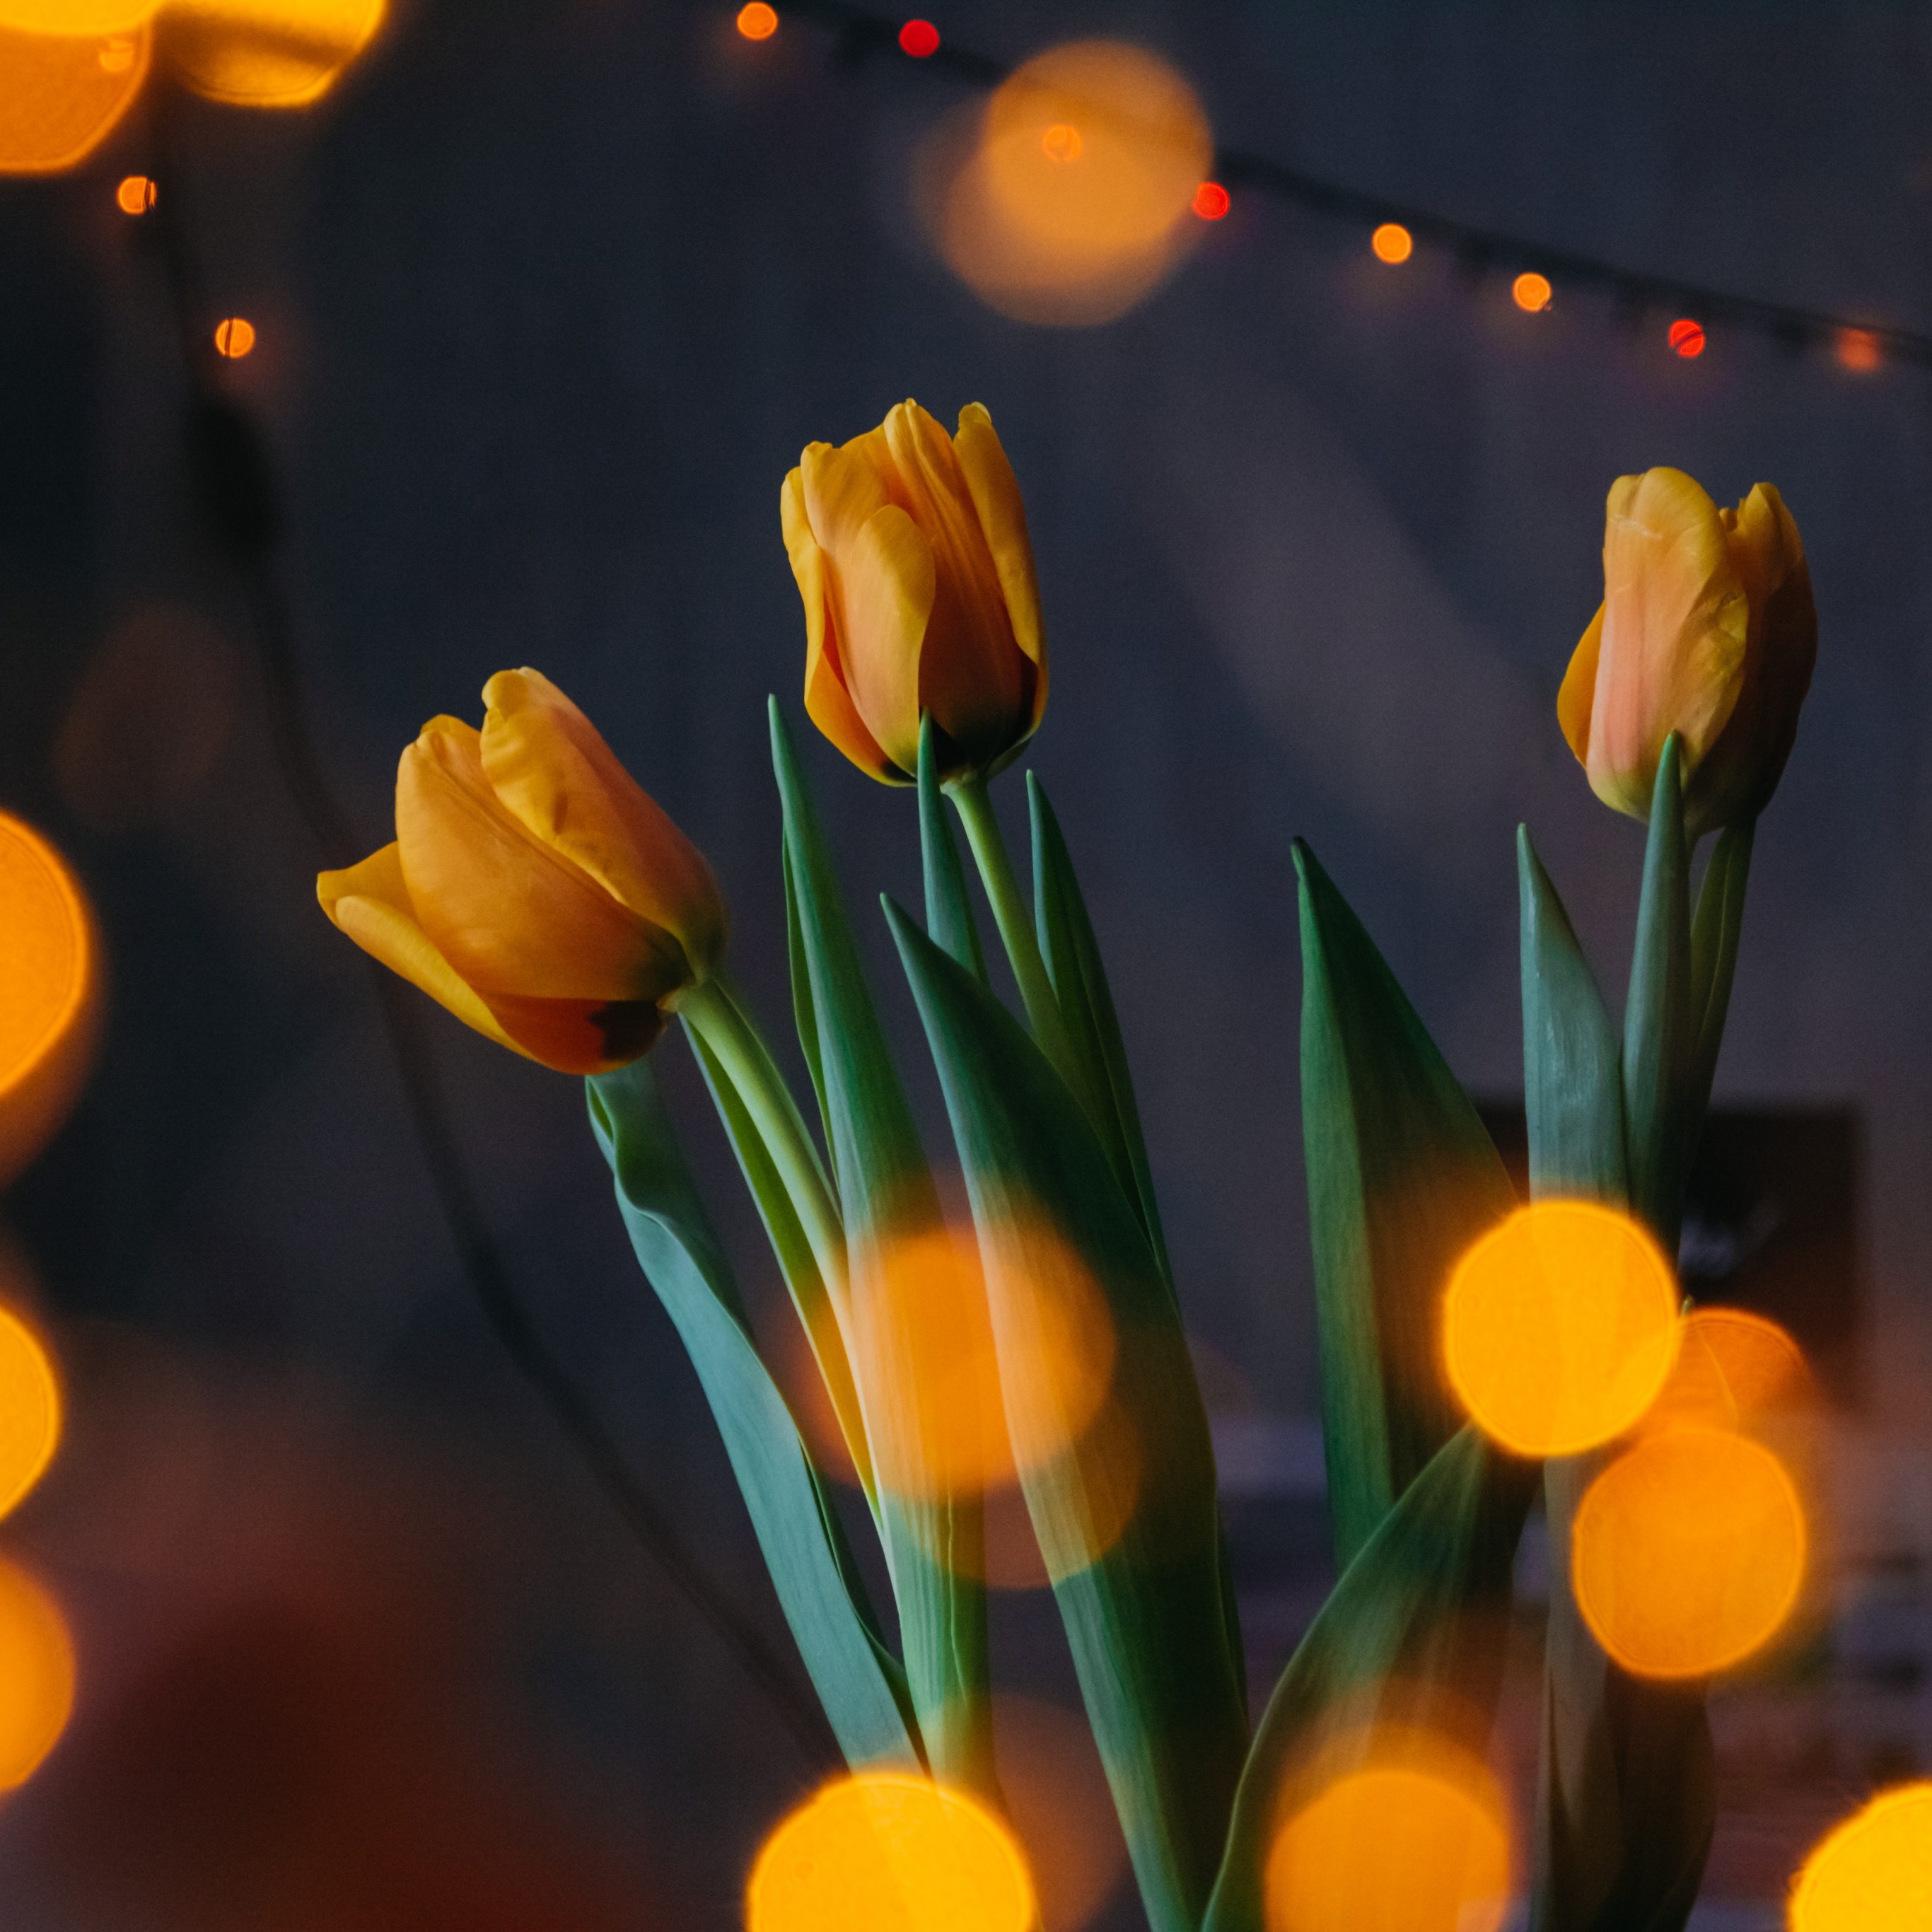 A photo of three yellow tulips with a blurred background. - Tulip